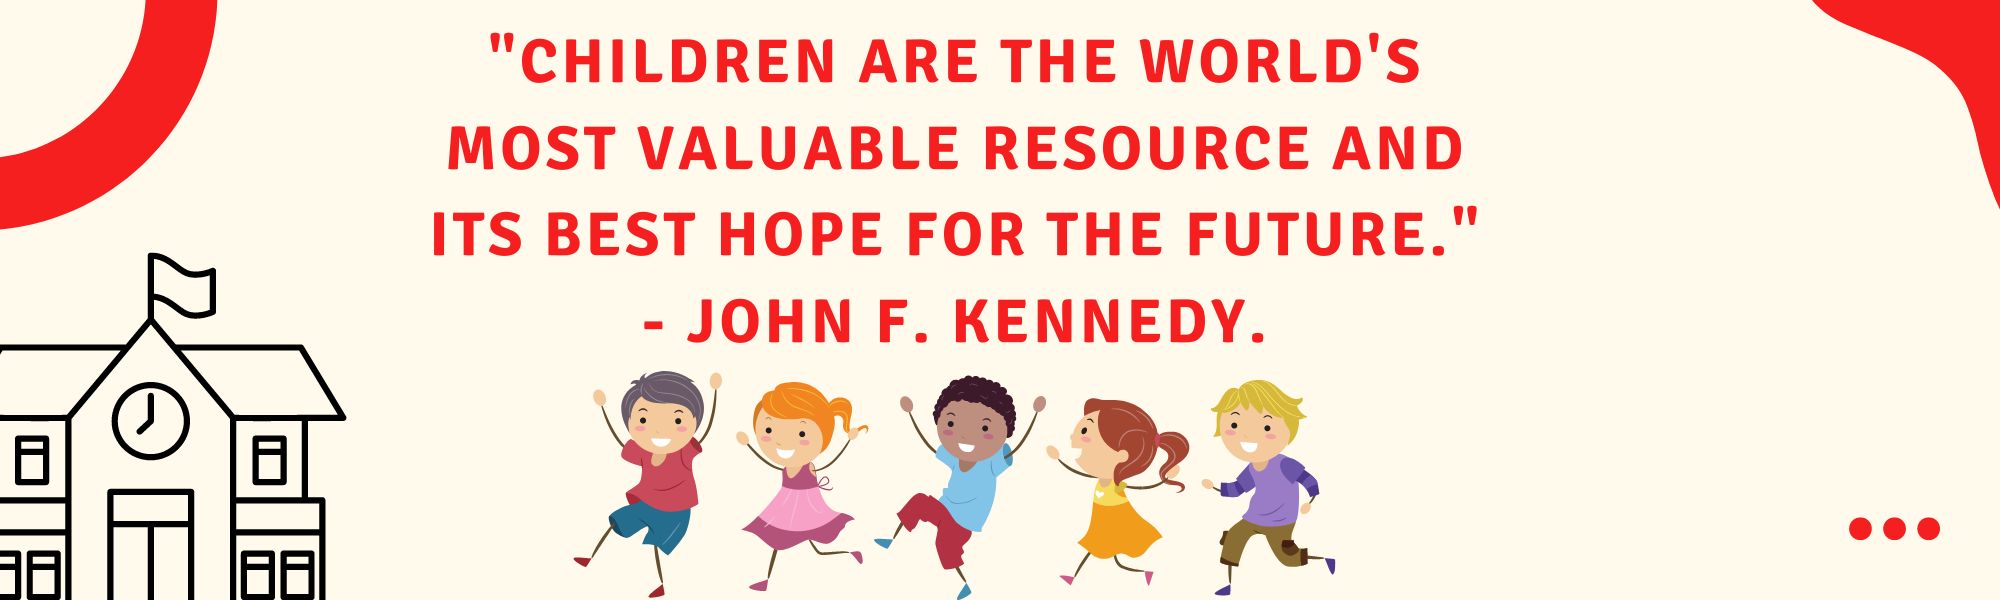 "Children are the world's most valuable resource and its best hope for the future" John F. Kennedy